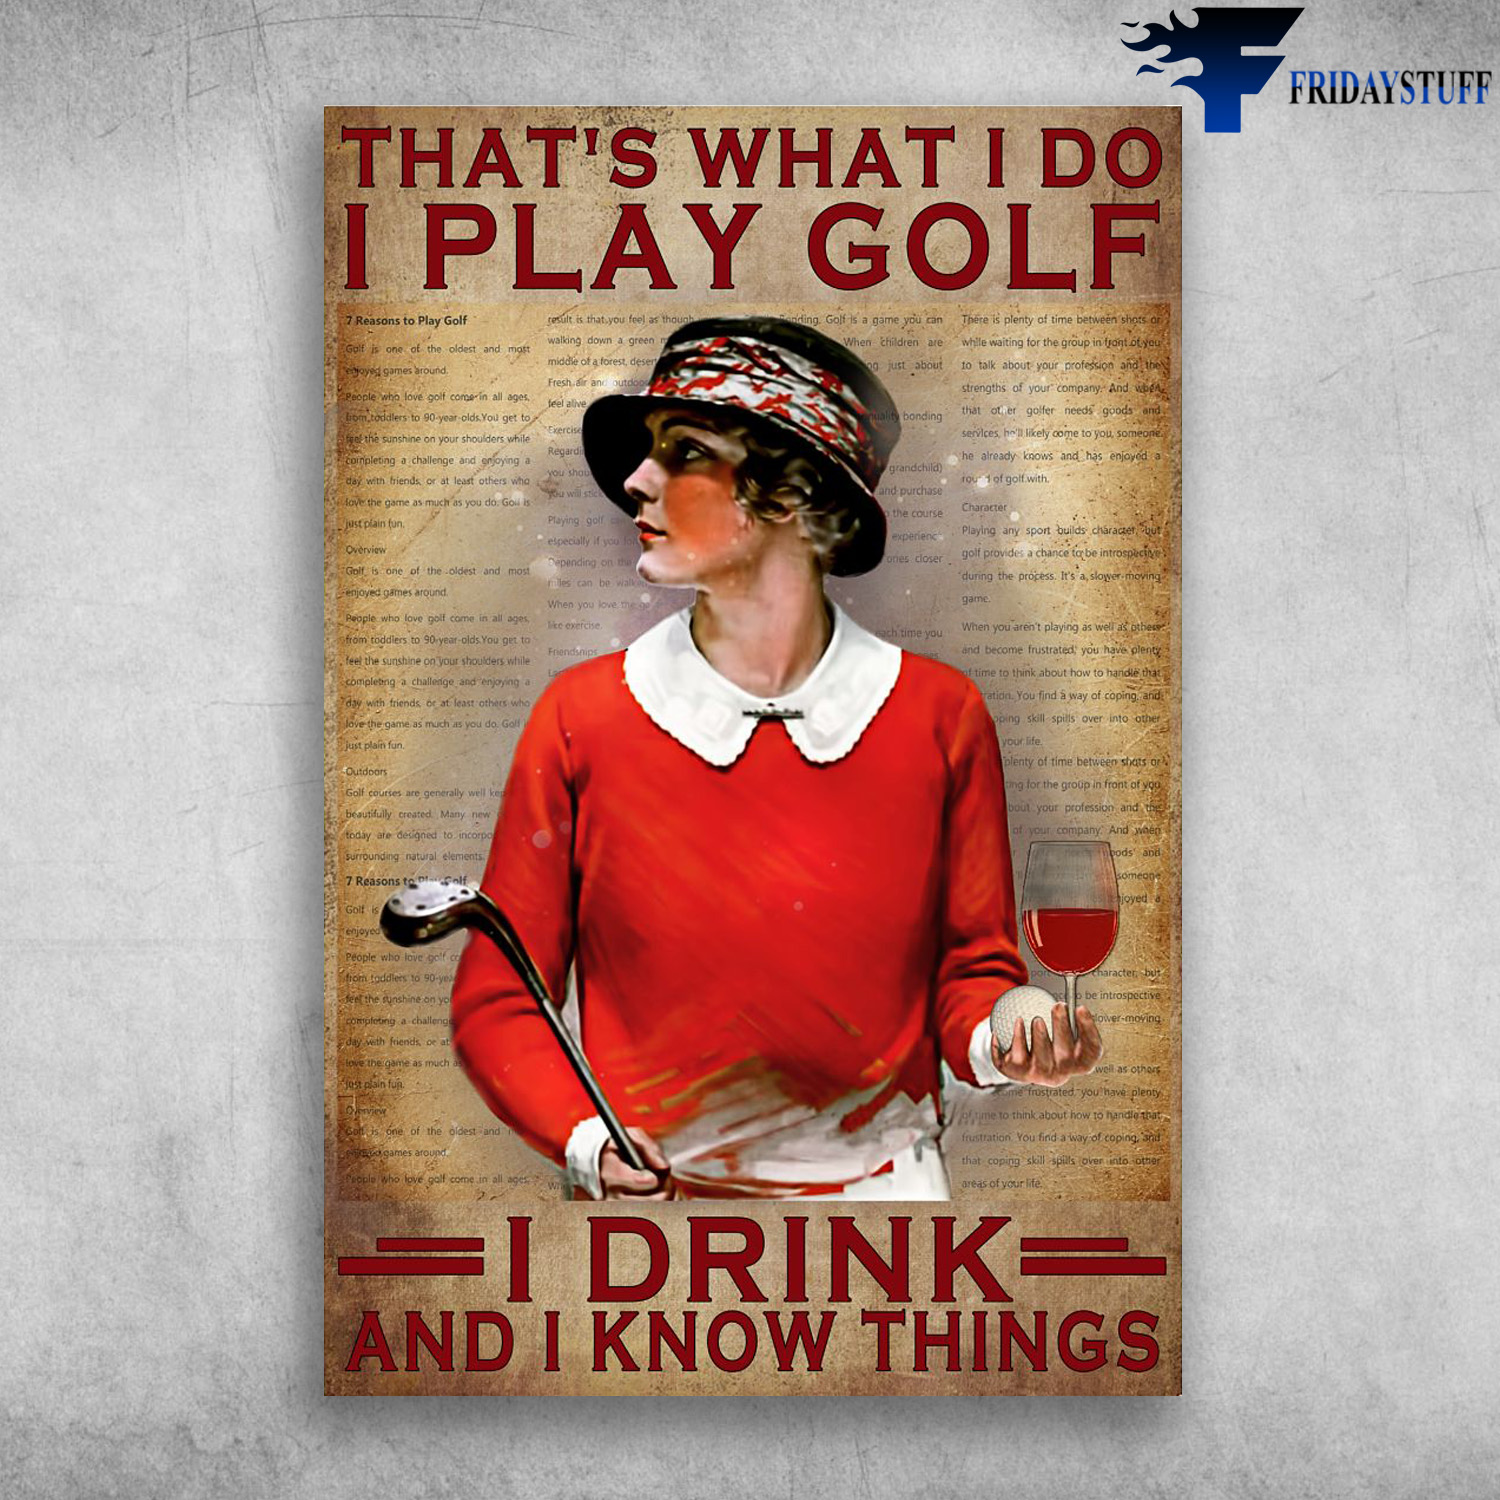 Girl Loves Golf And Wine - That's What I Do, I Pay Golf, I Drink And I Know Things